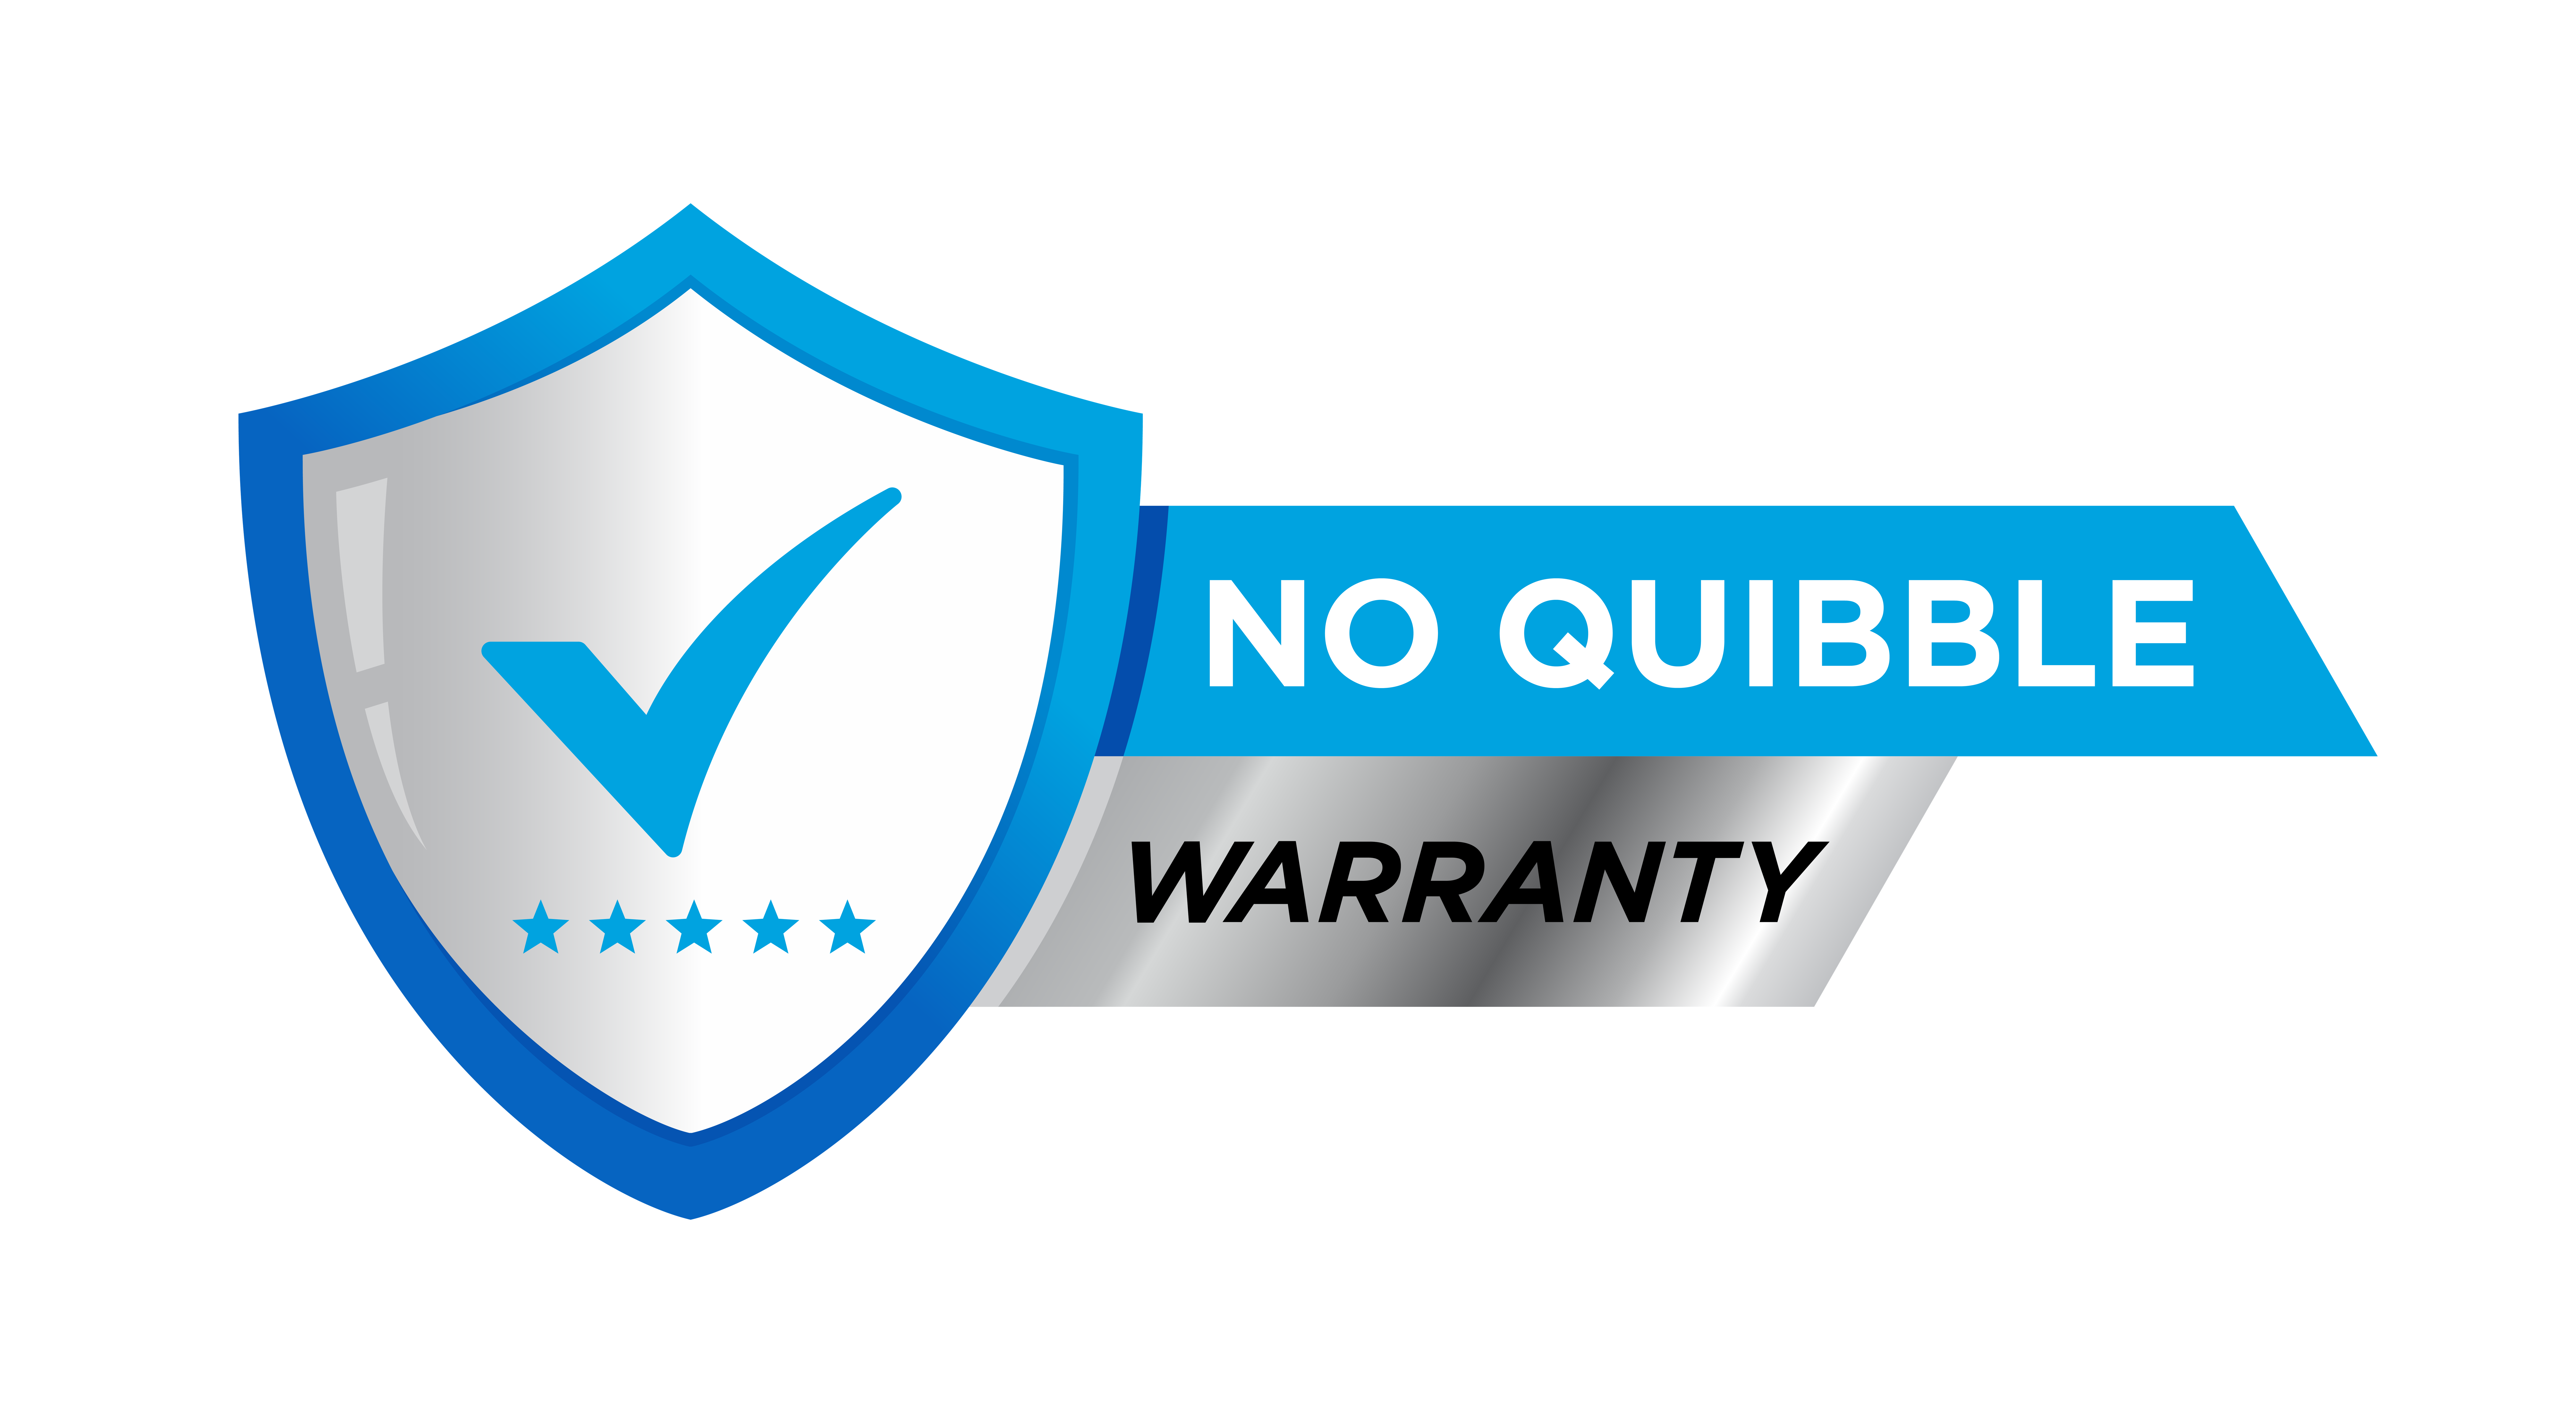 OceanLED becomes the first underwater light manufacturer to offer a No Quibble Warranty on its underwater lights